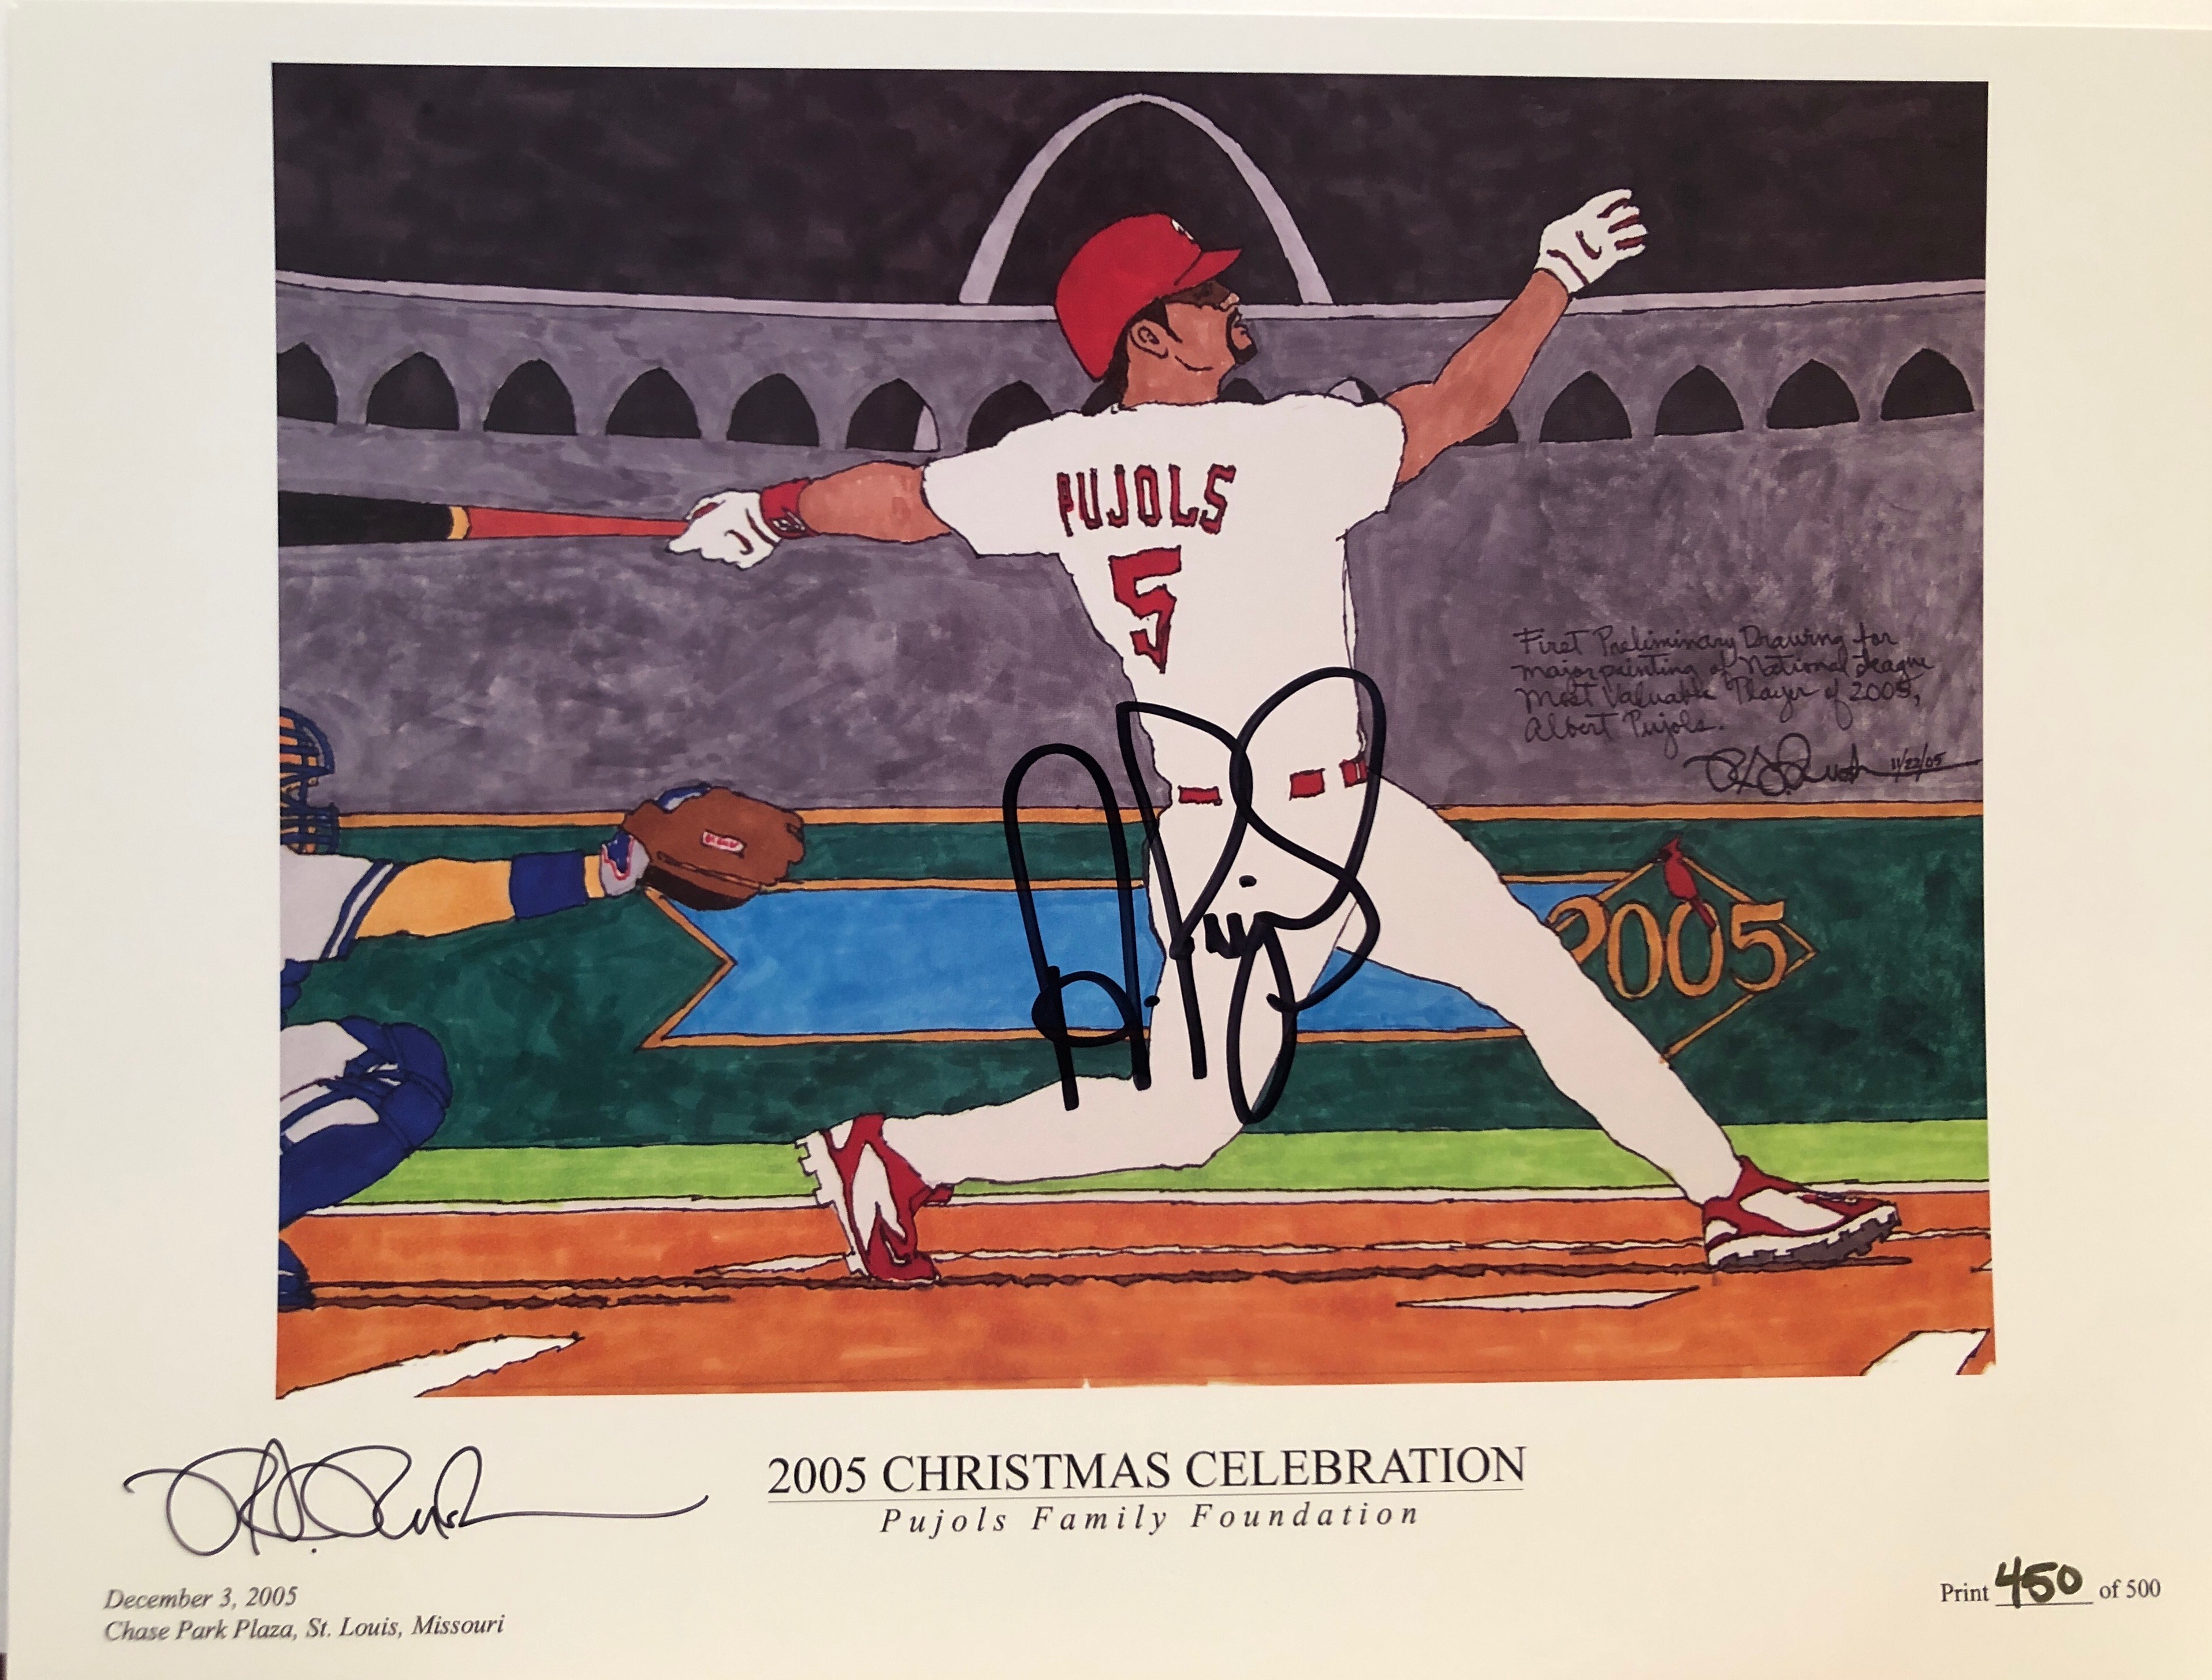 2005 - O' Night Divine, Limited Edition Print. Signed by Albert Pujols